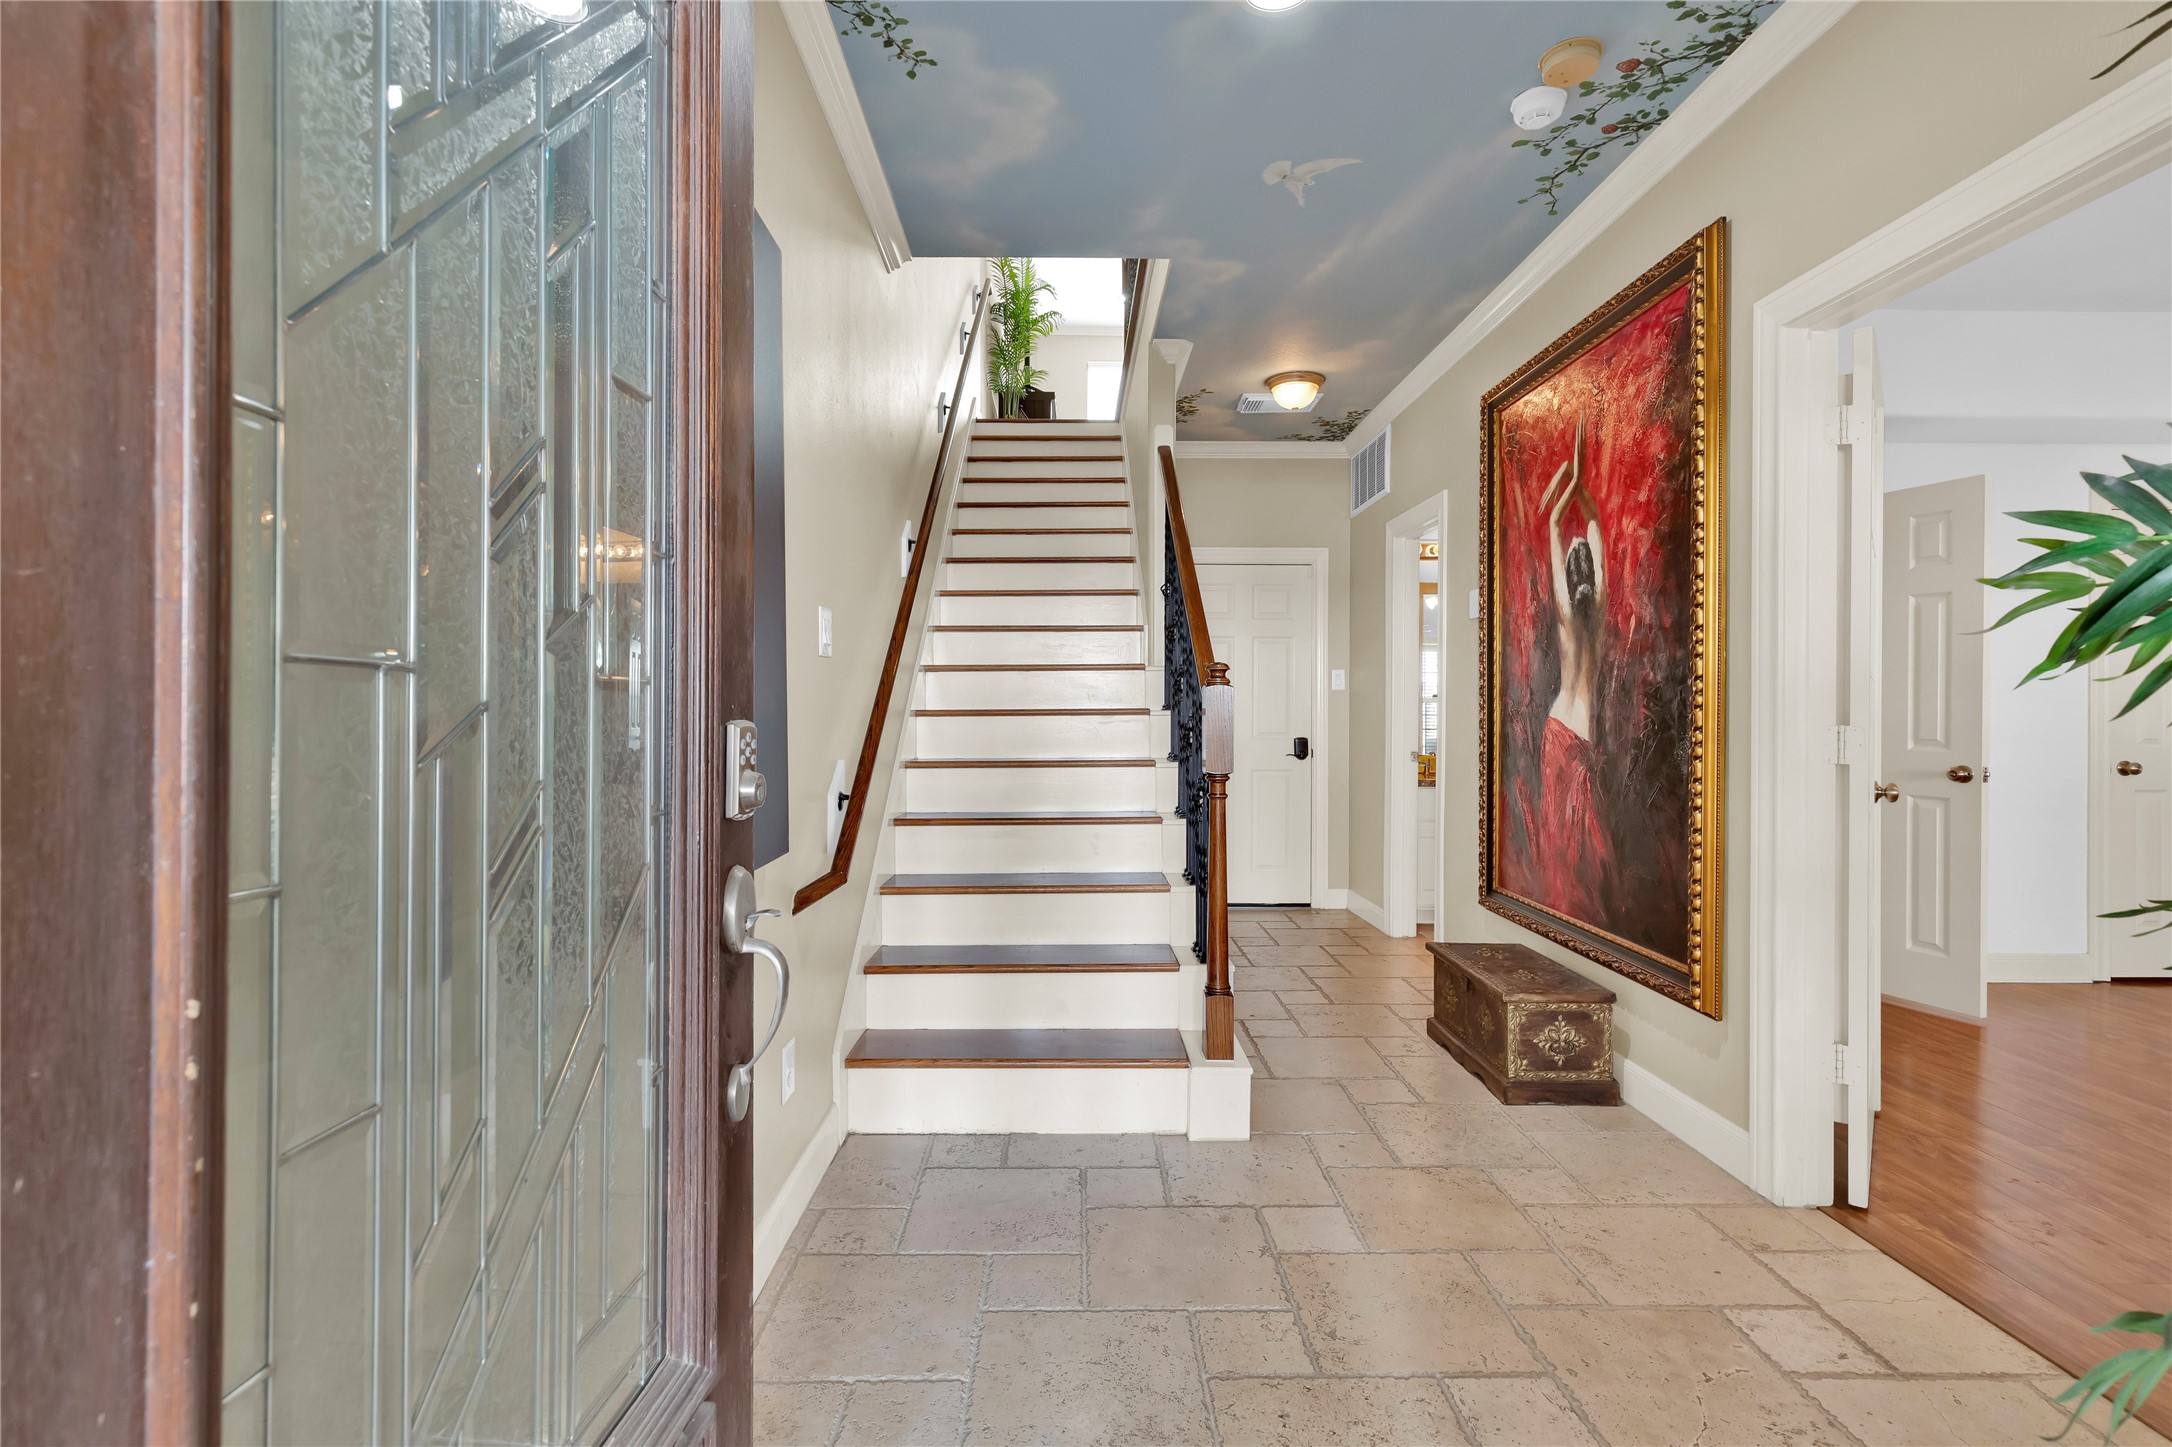 Stepping through the front door, your eyes are drawn upward to the custom hand-painted ceiling in the foyer.